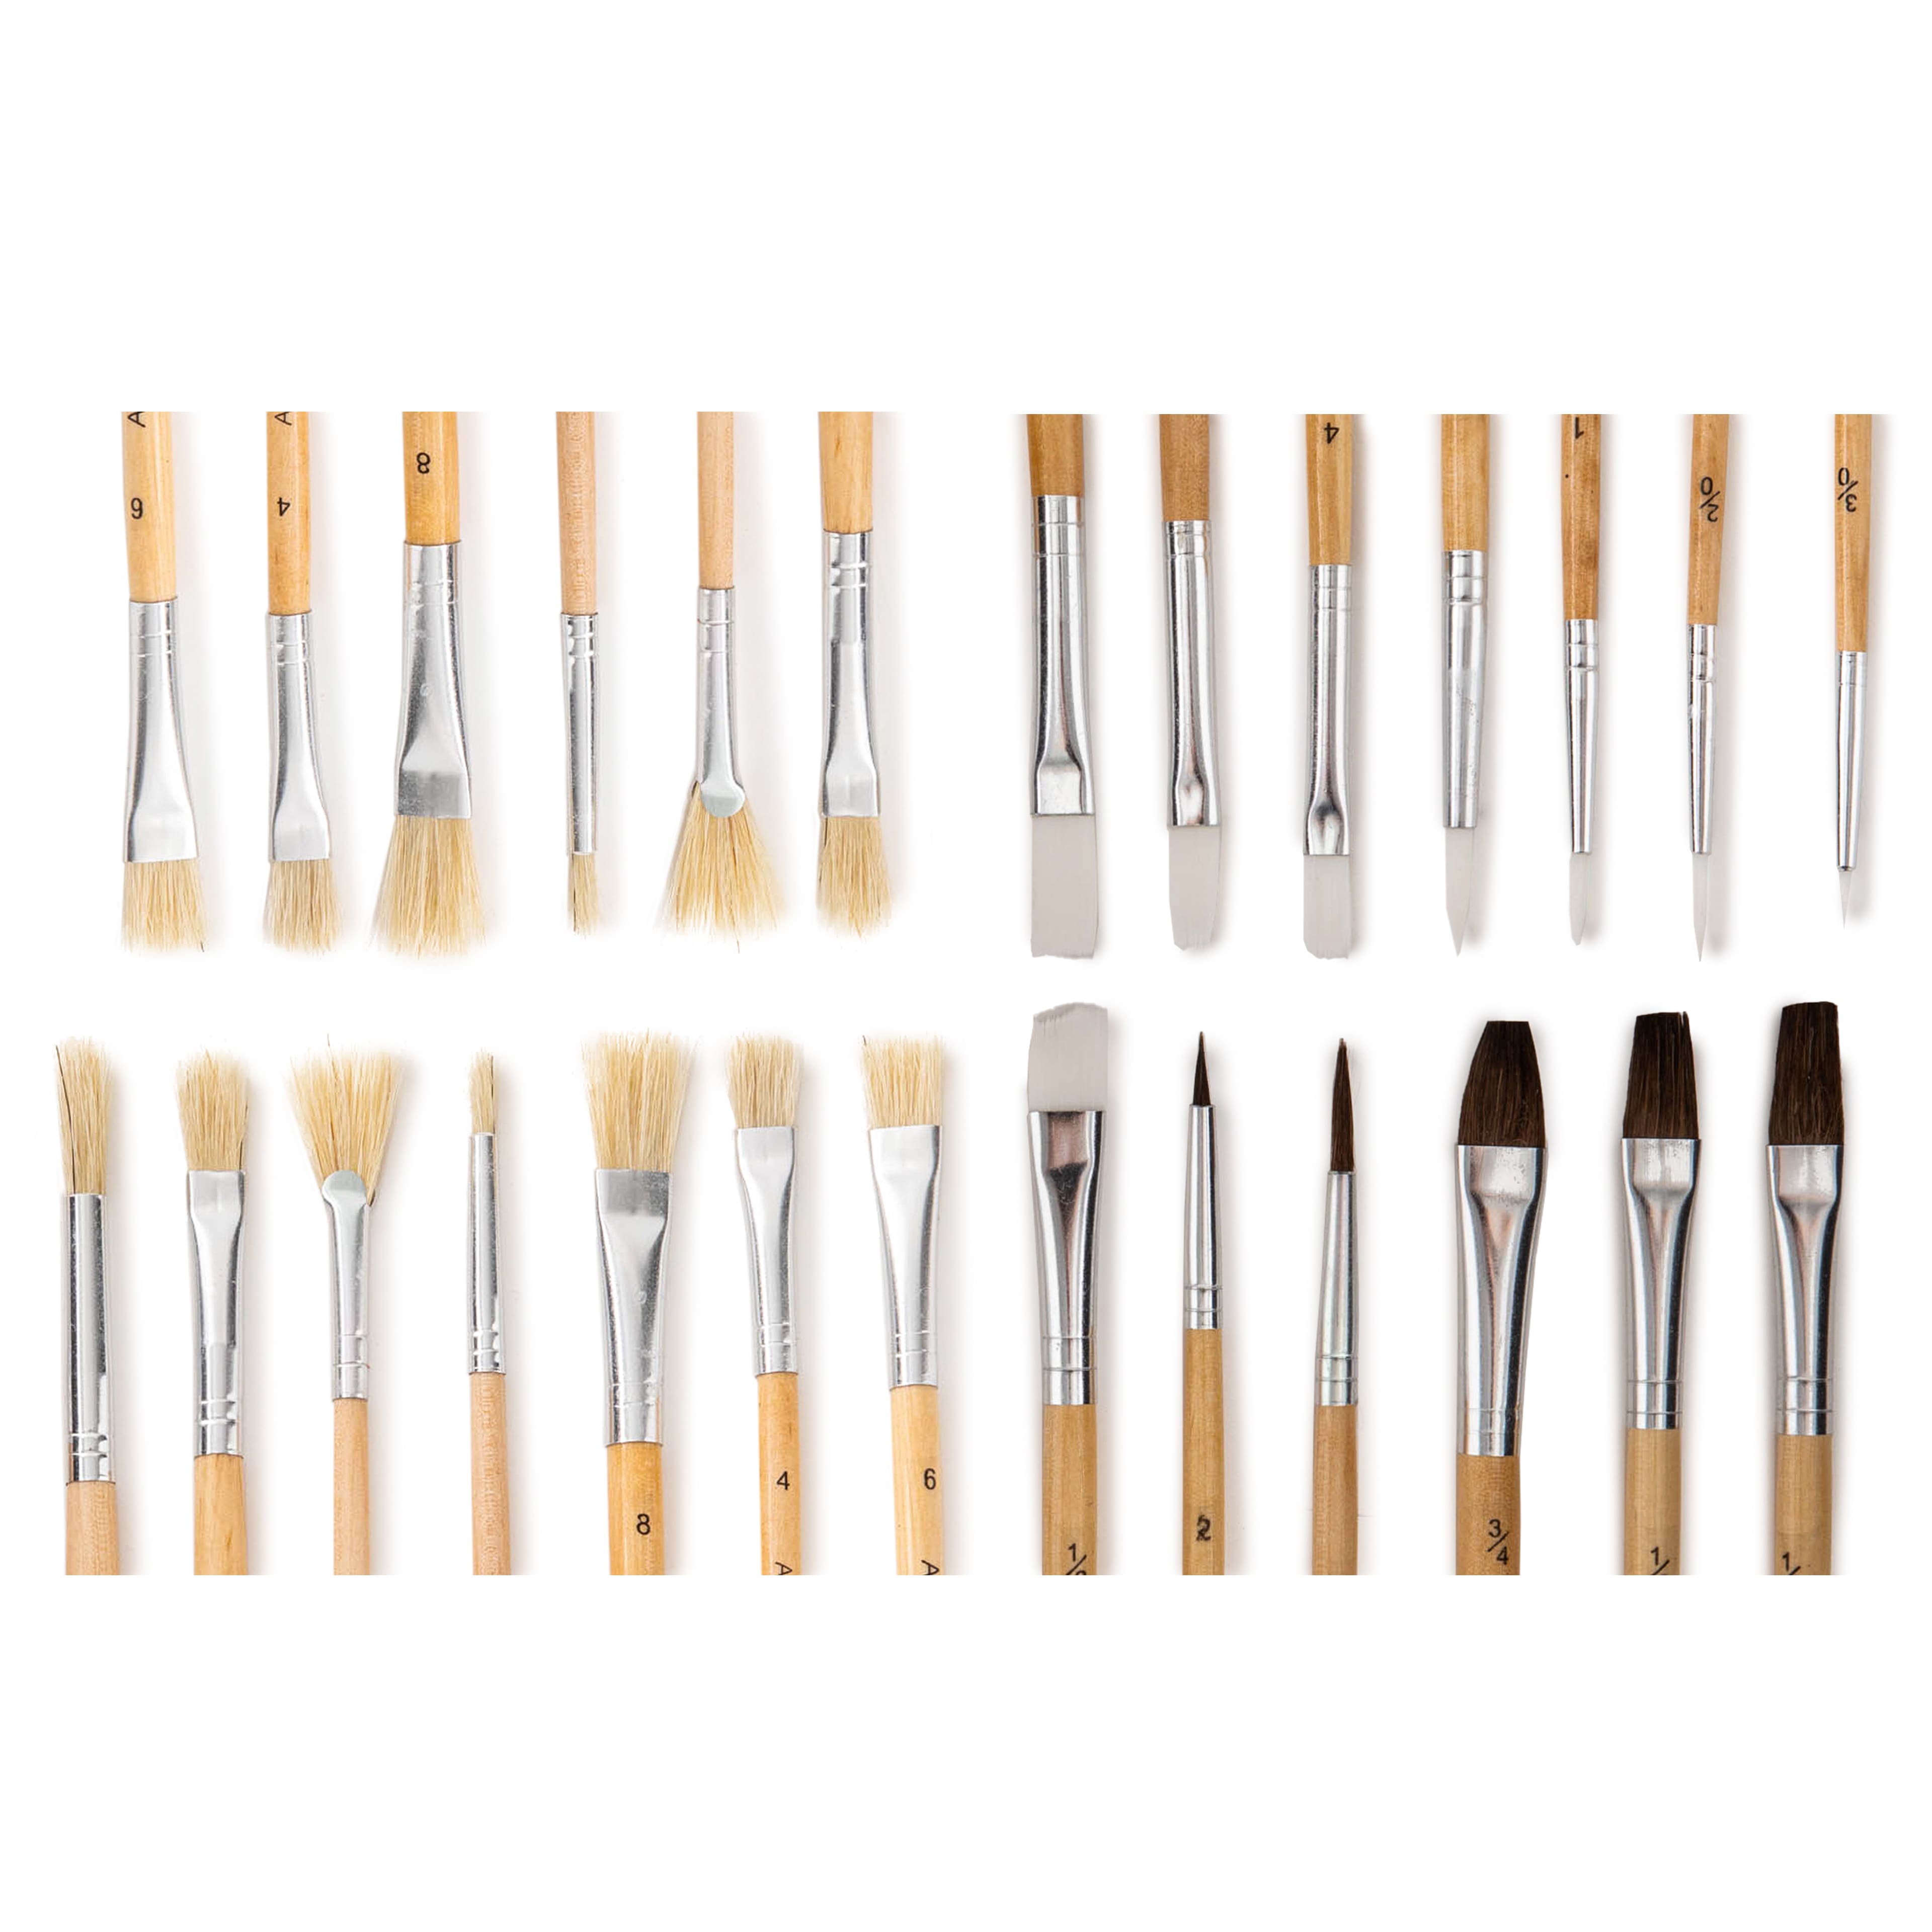 Creative Mark Pro Control Extra Wide Large Synthetic Brushes -  Multi-Filament Brush for Large Paint Coverage, Mural Painting, and More! -  [Size - 8]